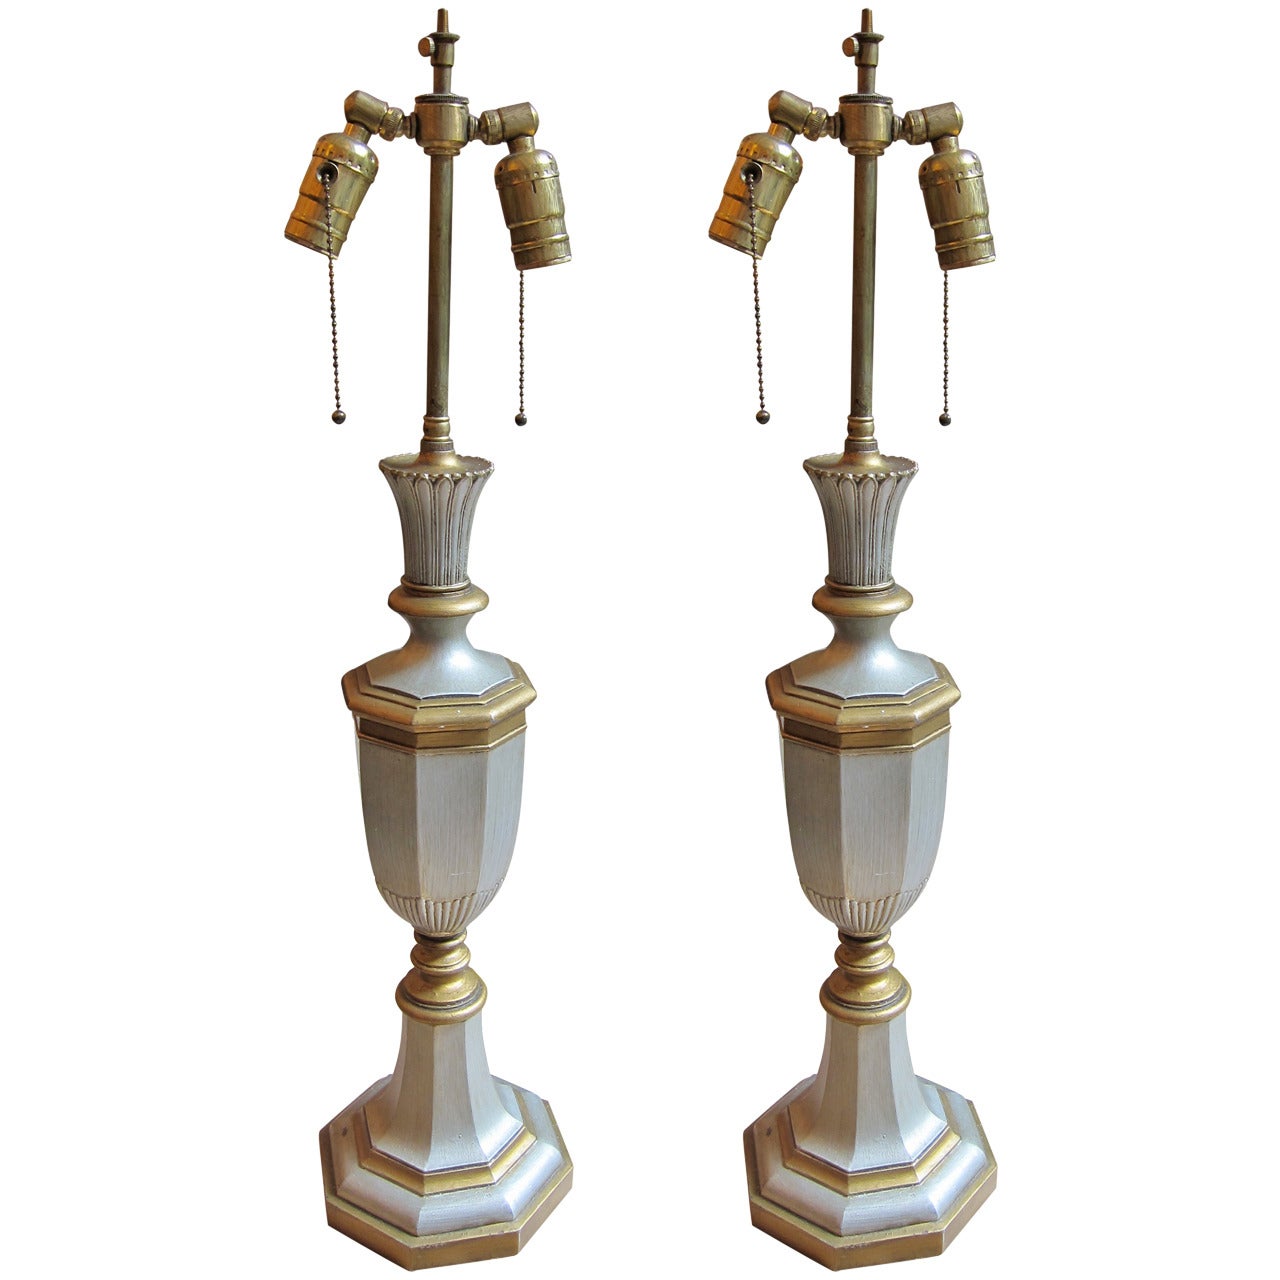 Pair of UK Georgian Style Bronze Table Lamps with Silver and Gold Plating, 1940s